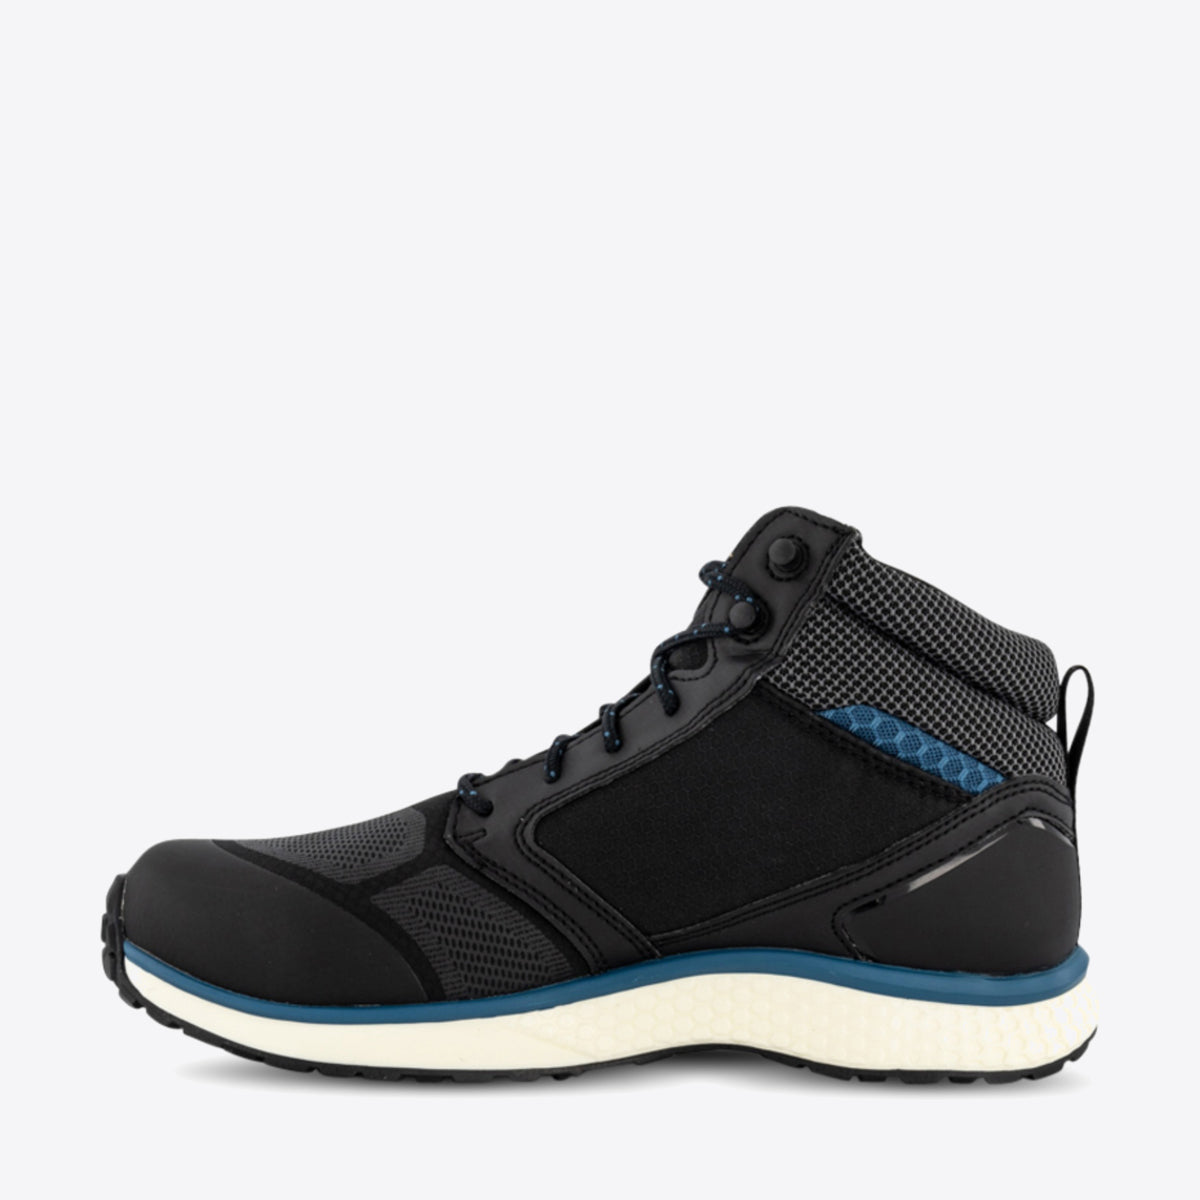 TIMBERLAND PRO Reaxion Mid Black/Blue - Image 7